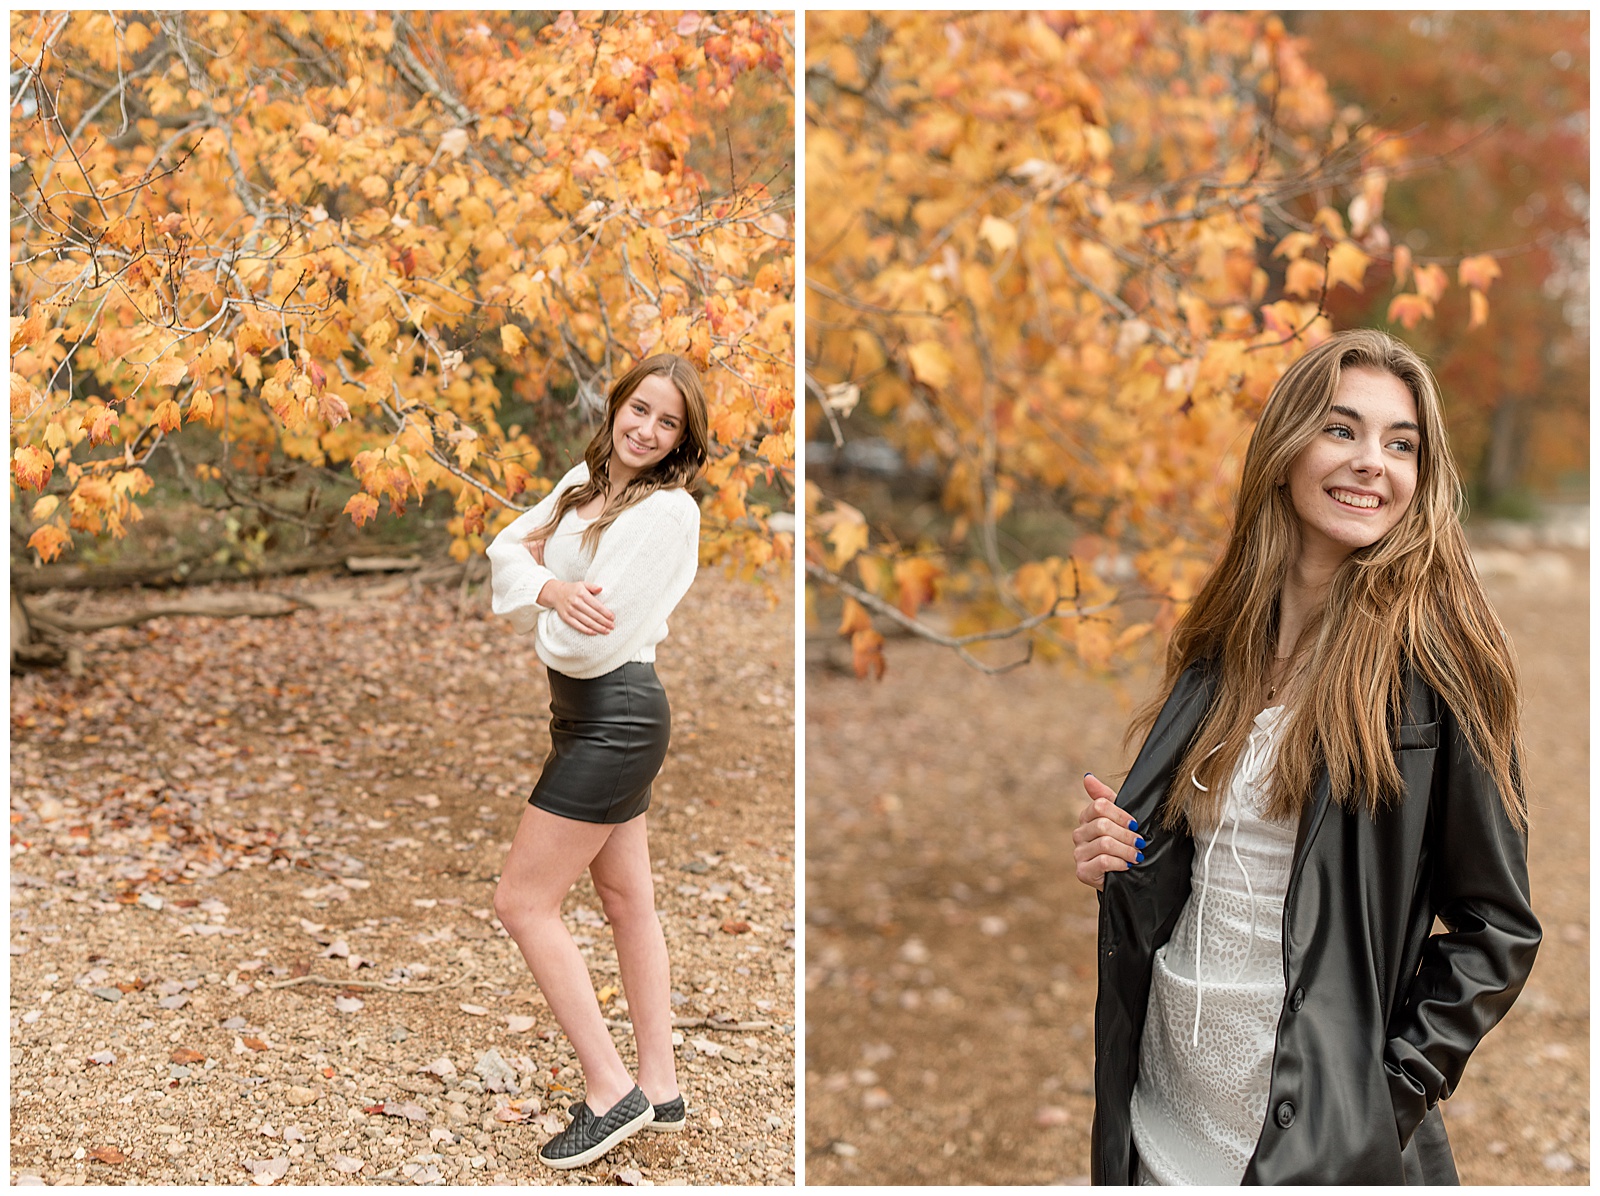 senior girl spokesmodel with ivory top and black miniskirt with left shoulder toward camera smiling by bright golden fall tree